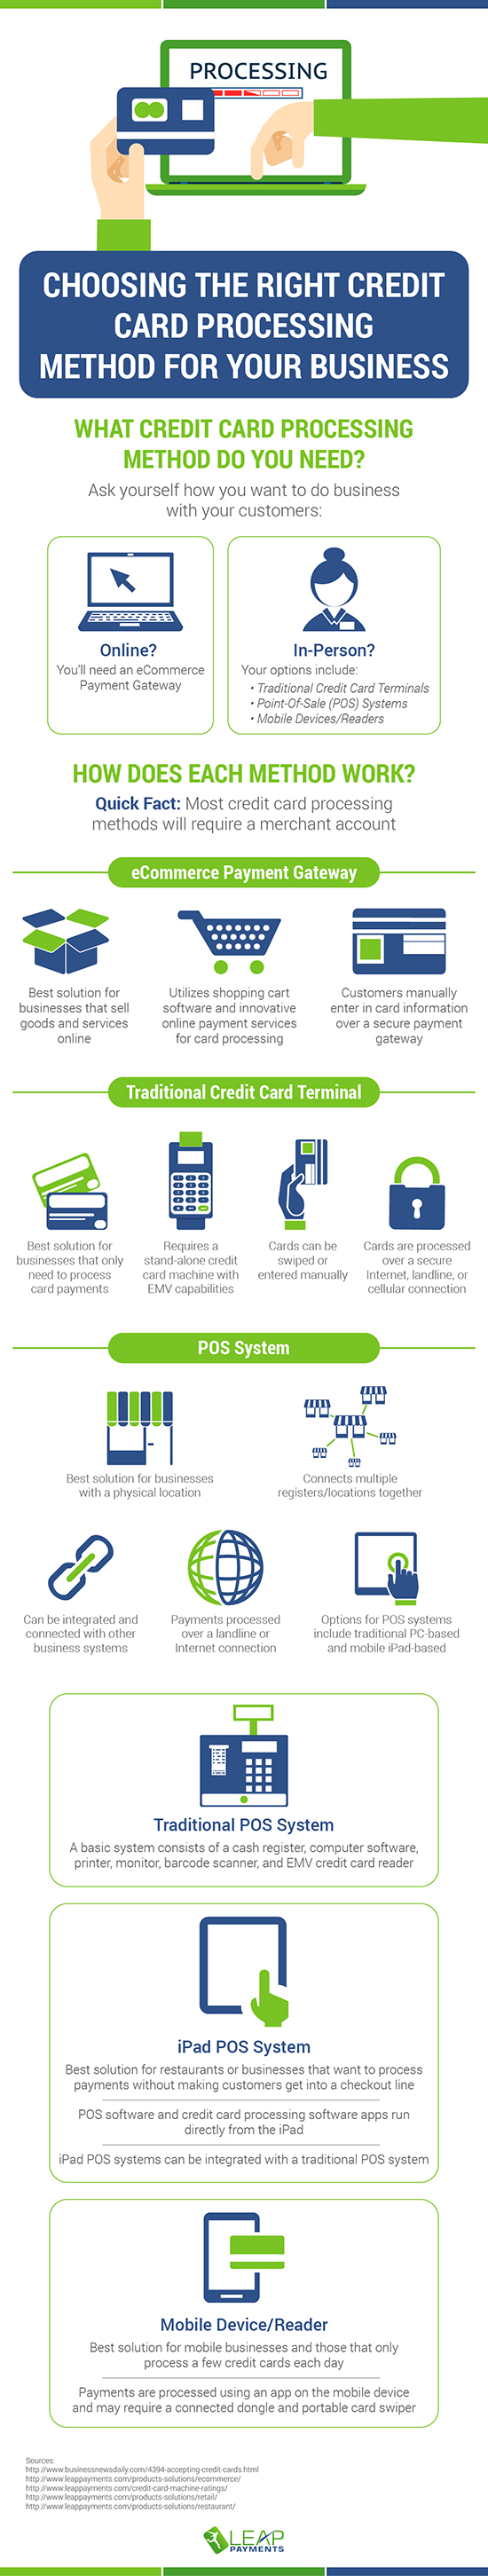 Credit Card Processing Infographic